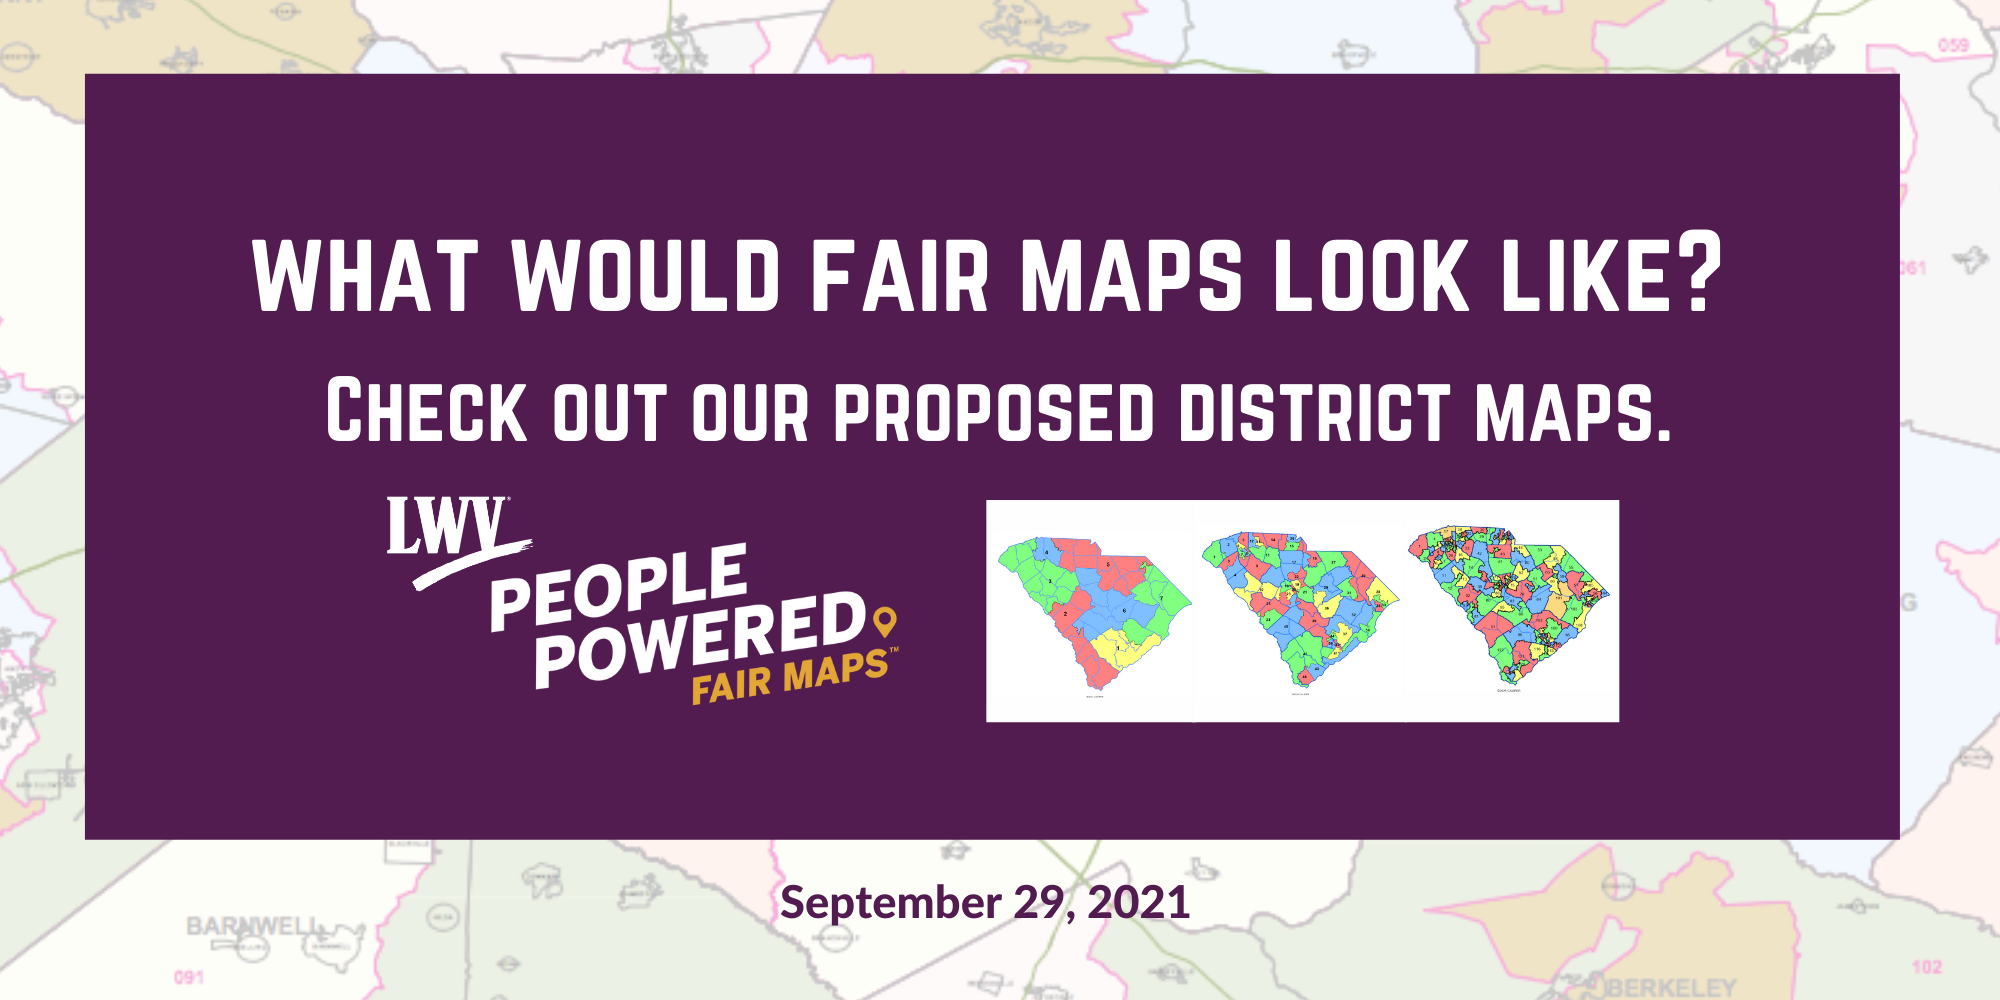 Check out the LWVSC proposed district maps